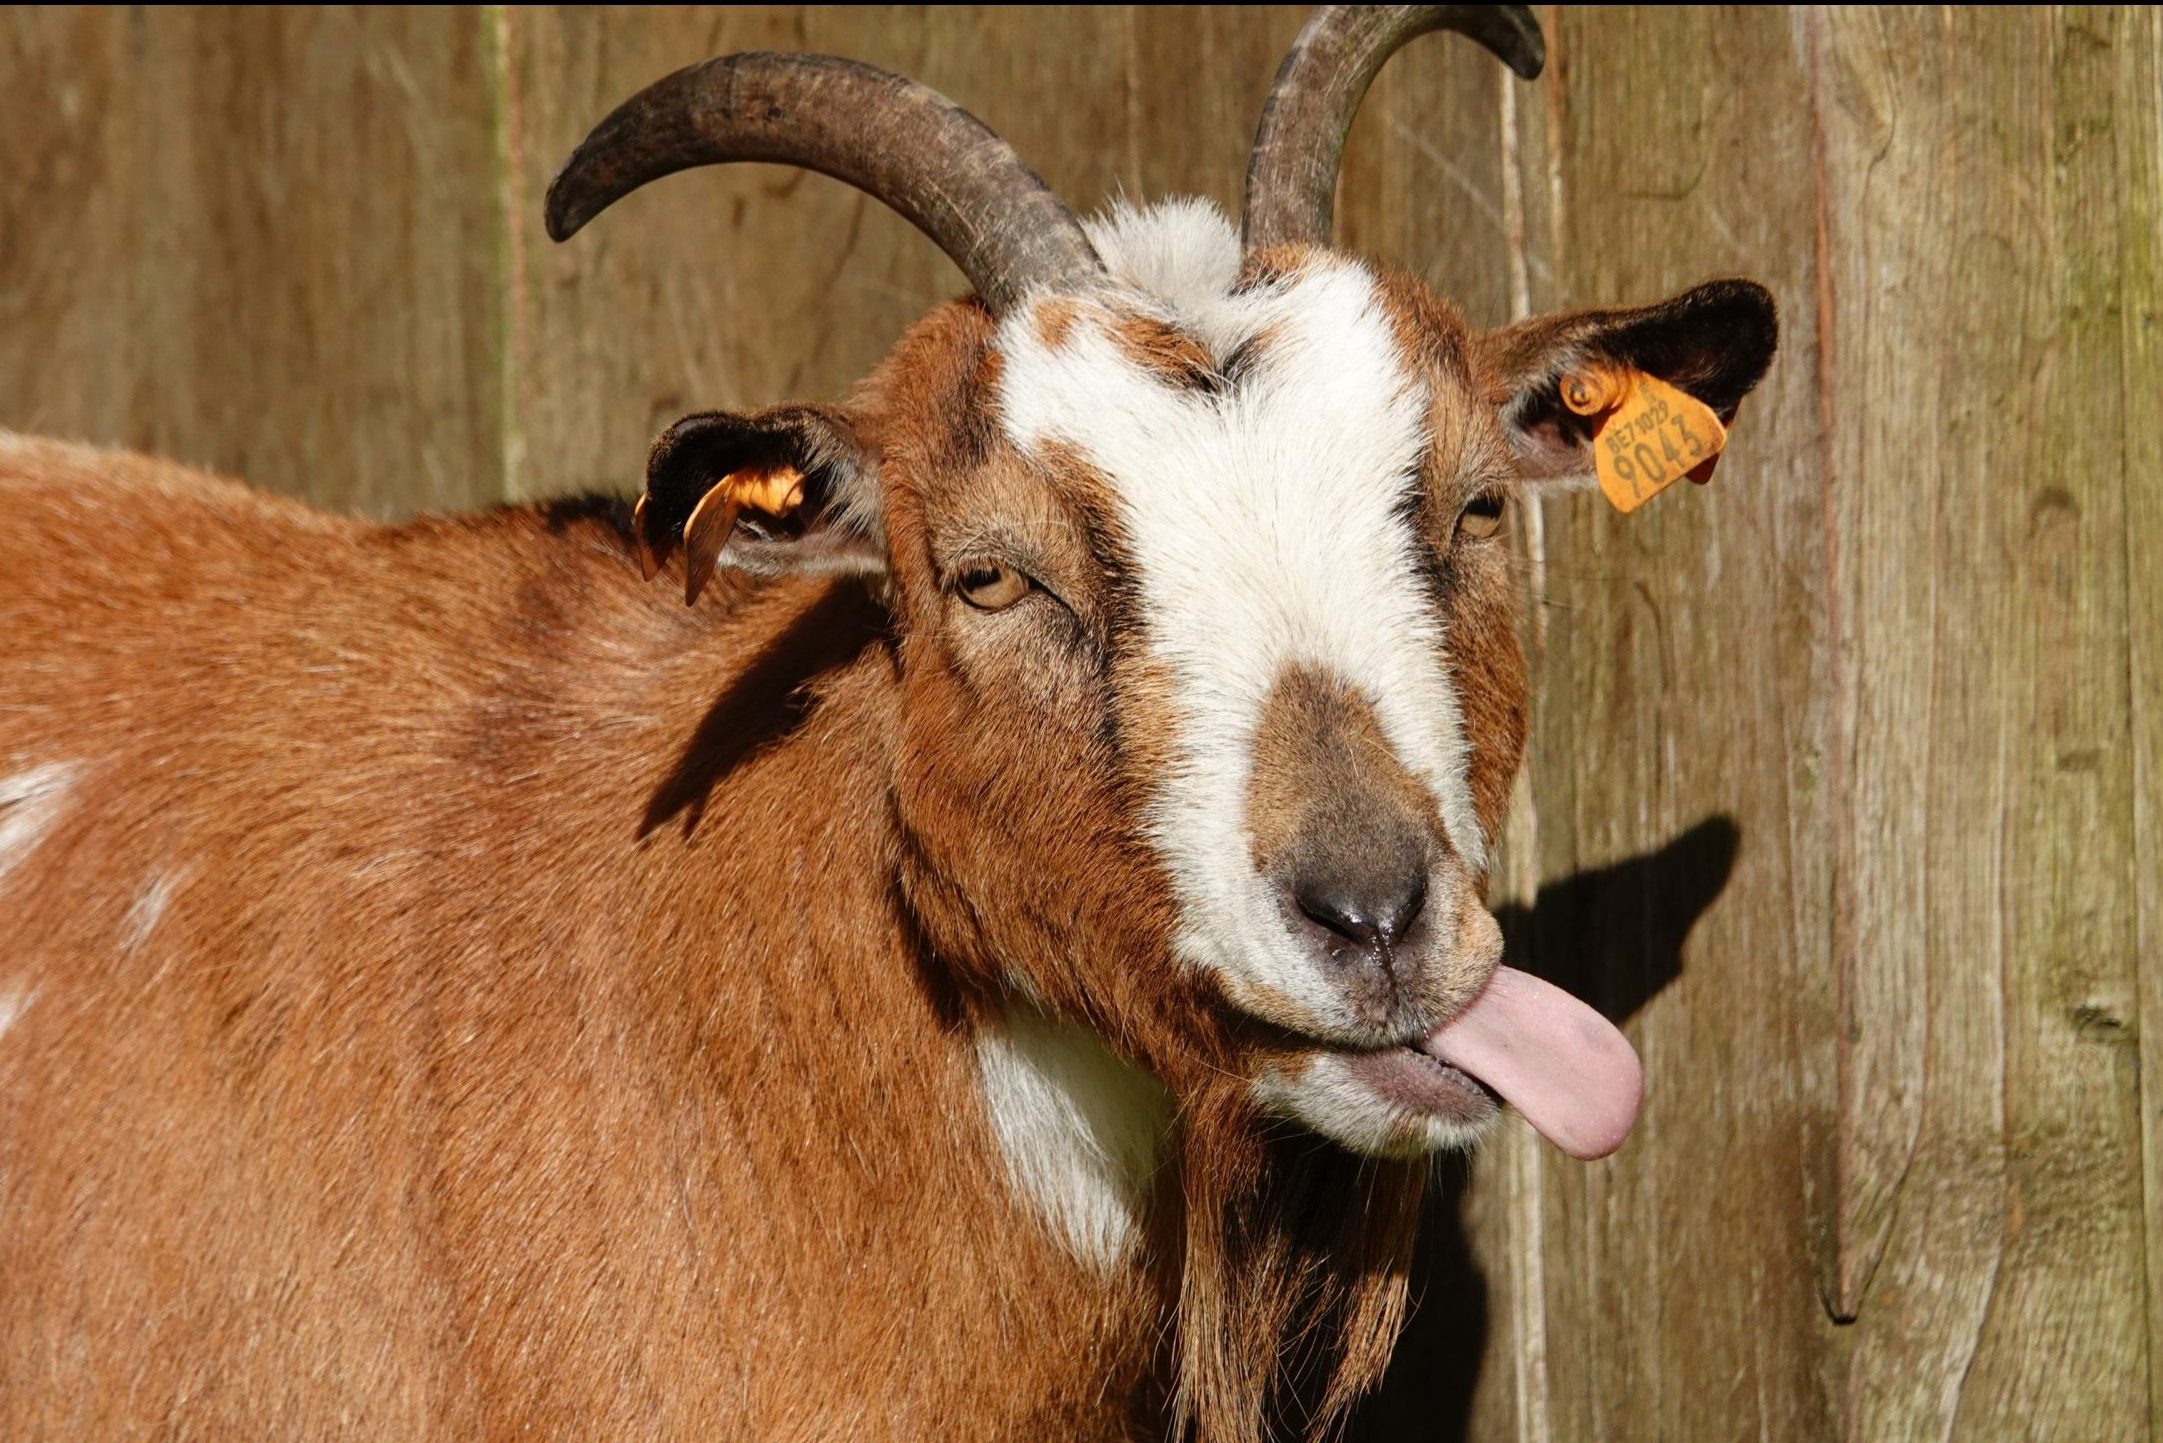 Funny Goat Picture You'll Love. Reader's Digest